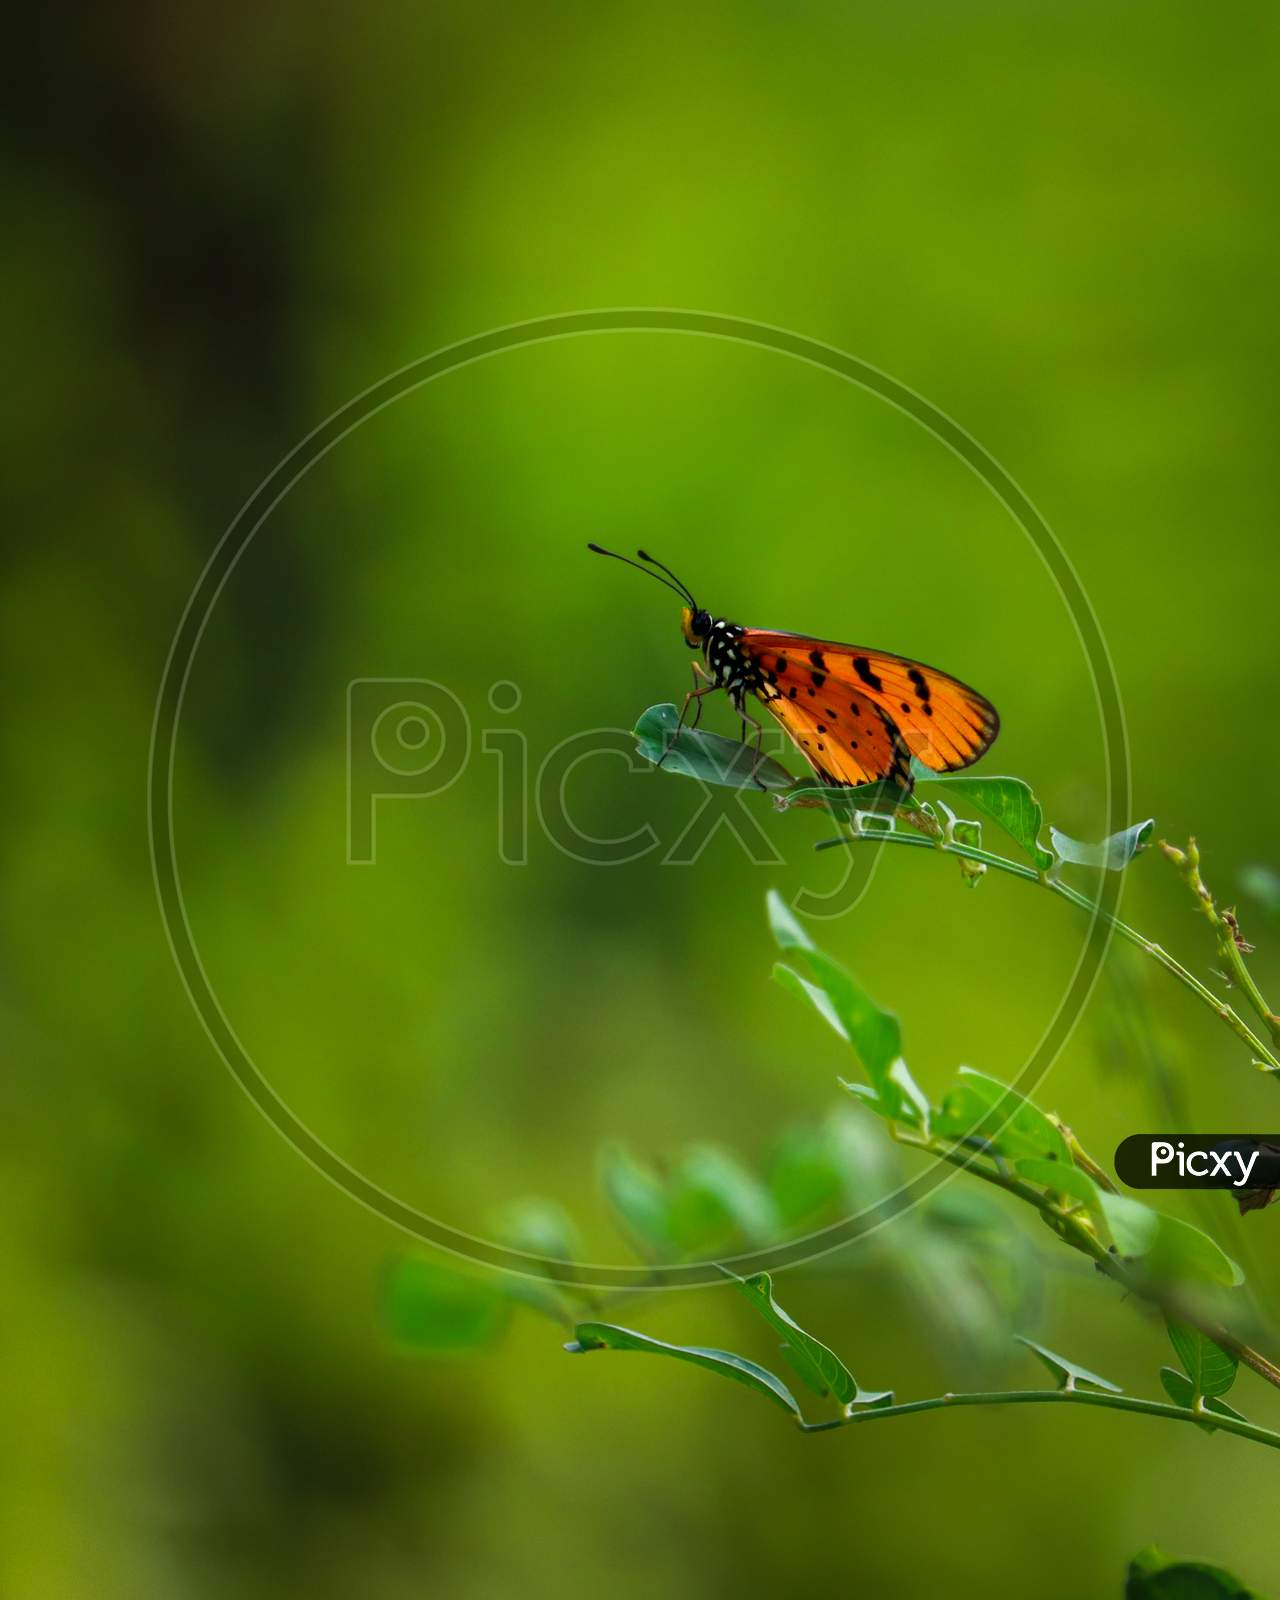 Colorful Oregon Butterfly Sitting On Leaf With Green Bokeh Background.